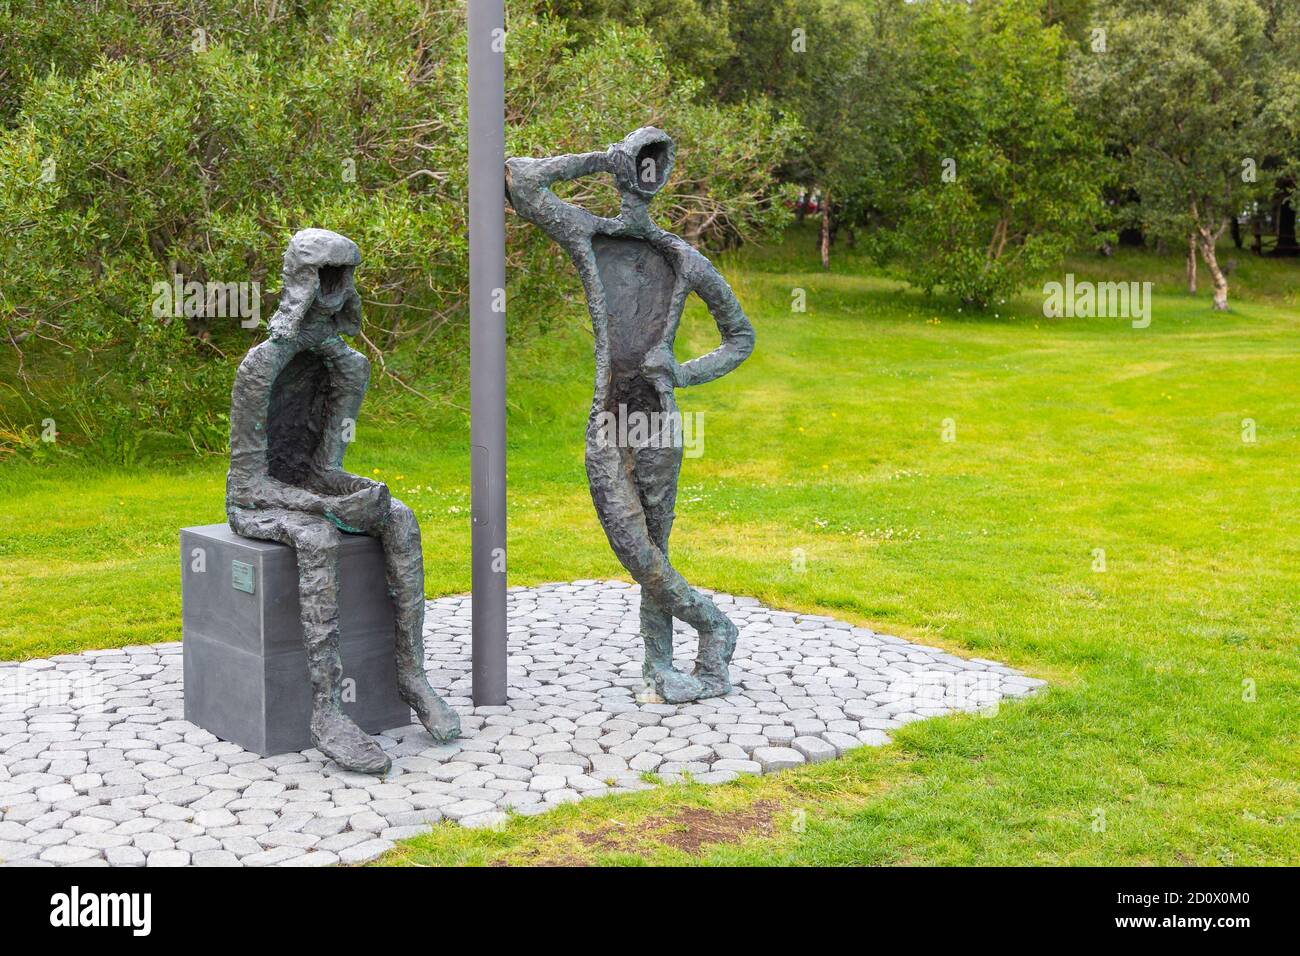 Reykjavik,Iceland- 27 August 2015: Boy and Girl, Monument at Midborg on Lake Tjornin in the city center. Stock Photo